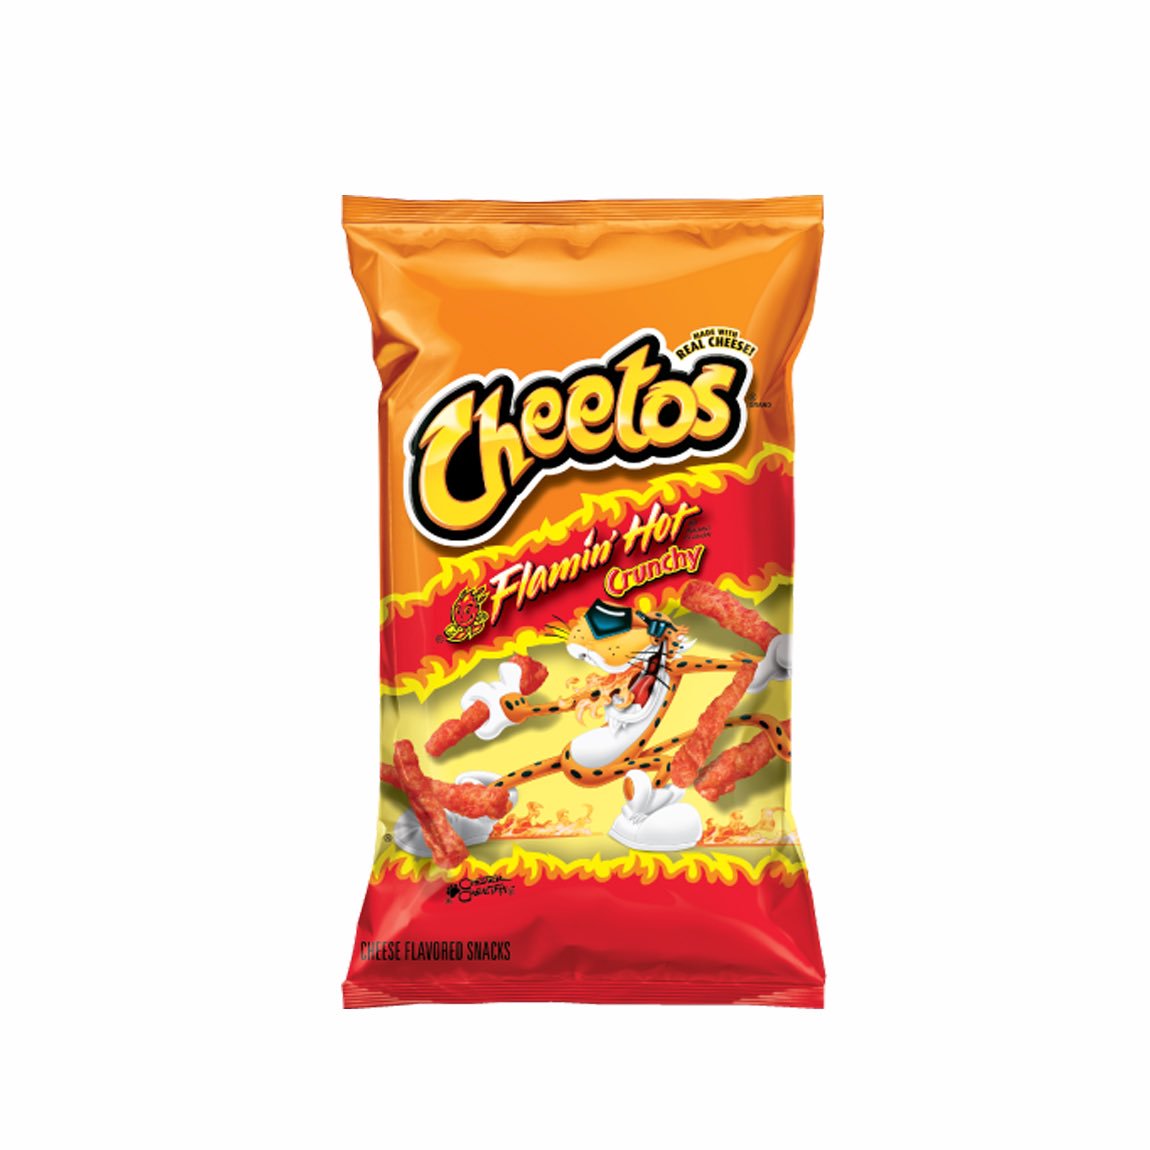 LET’S SET A RECORD OF THE MOST RETWEETED HOT CHEETOS BAG OF ALL TIME. @foos...